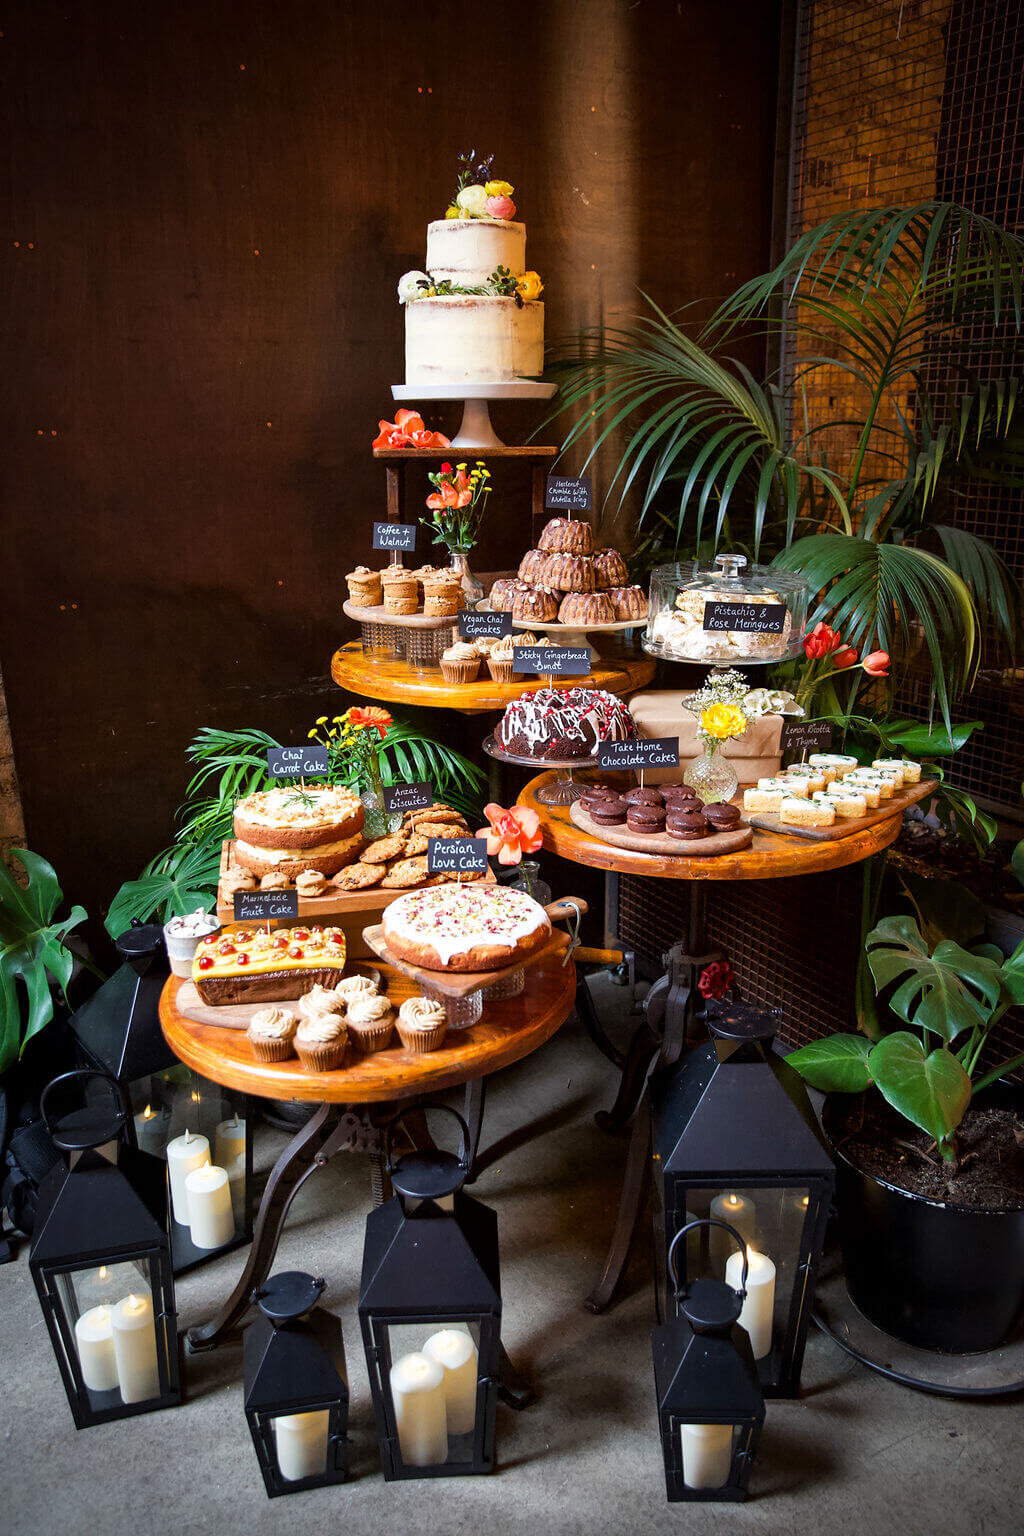 A variety of cakes at a wedding reception  on table